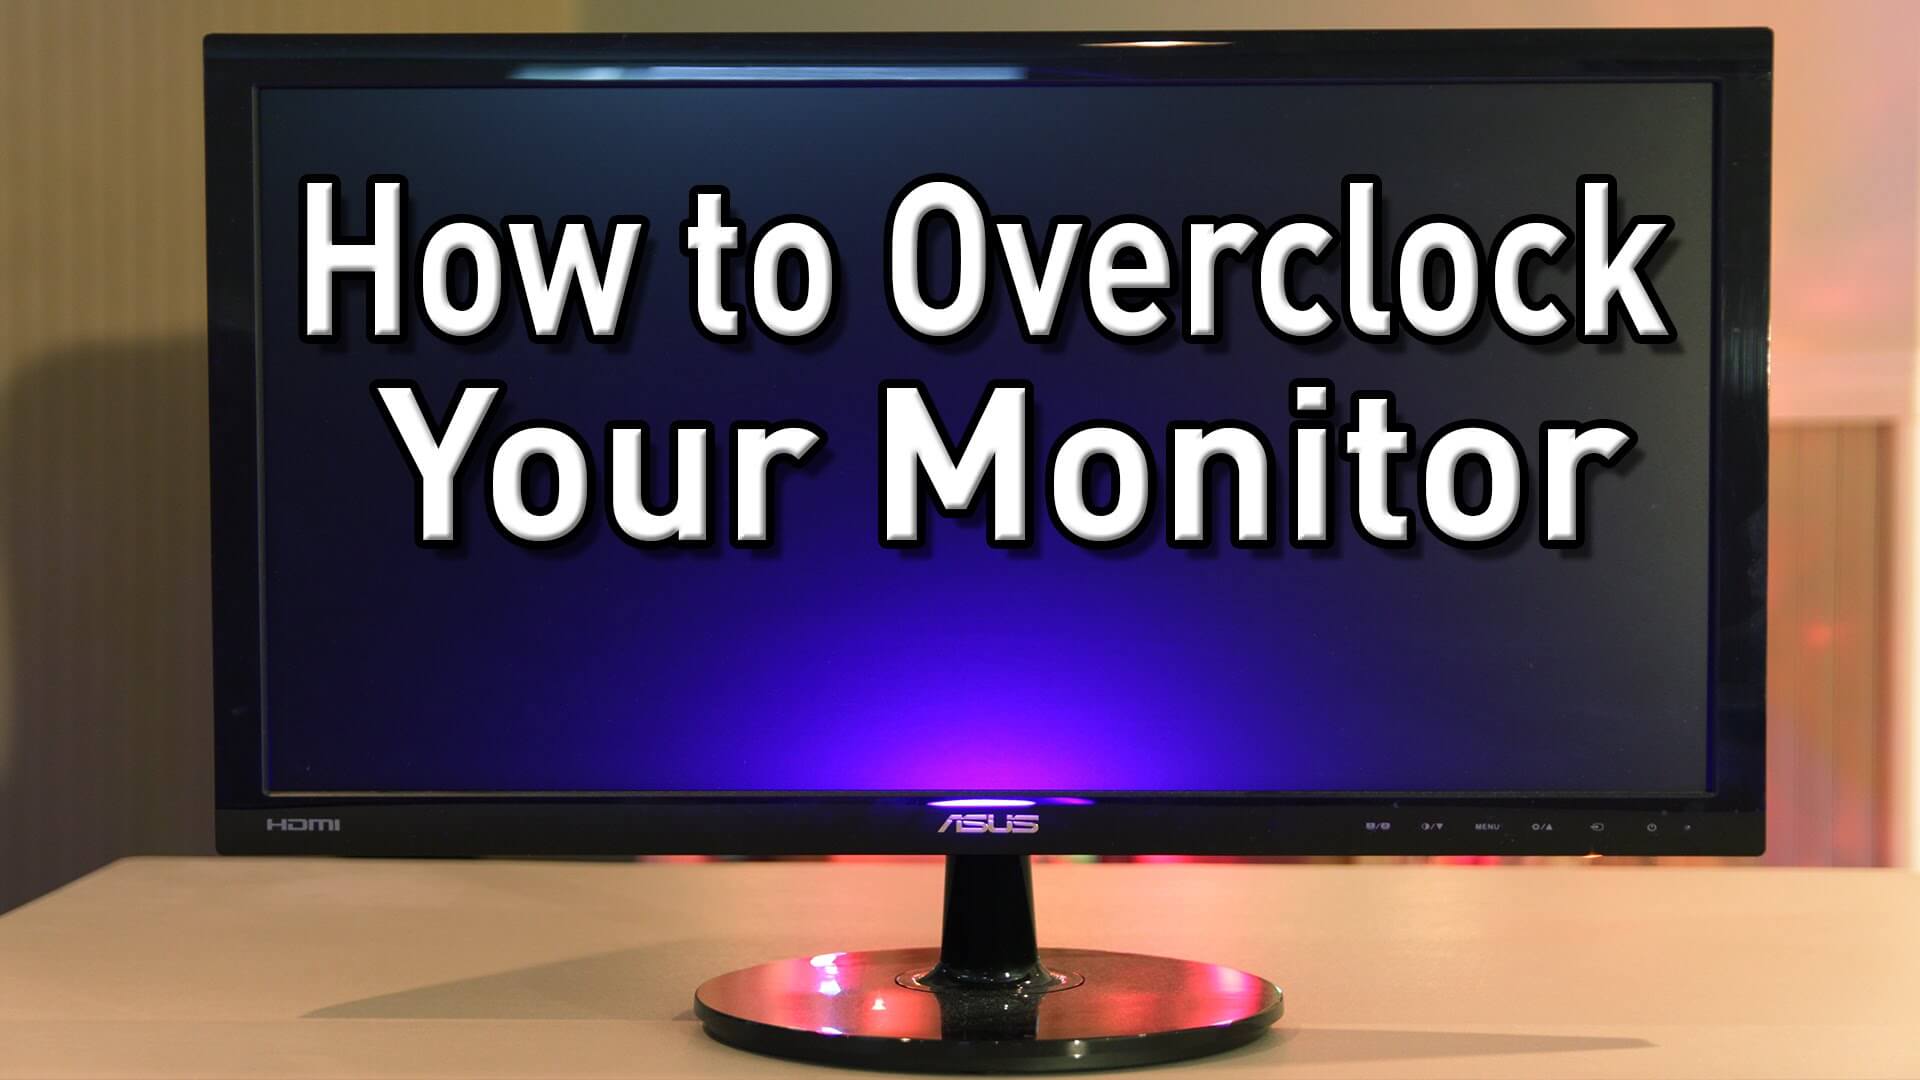 How to Overclock Your Monitor